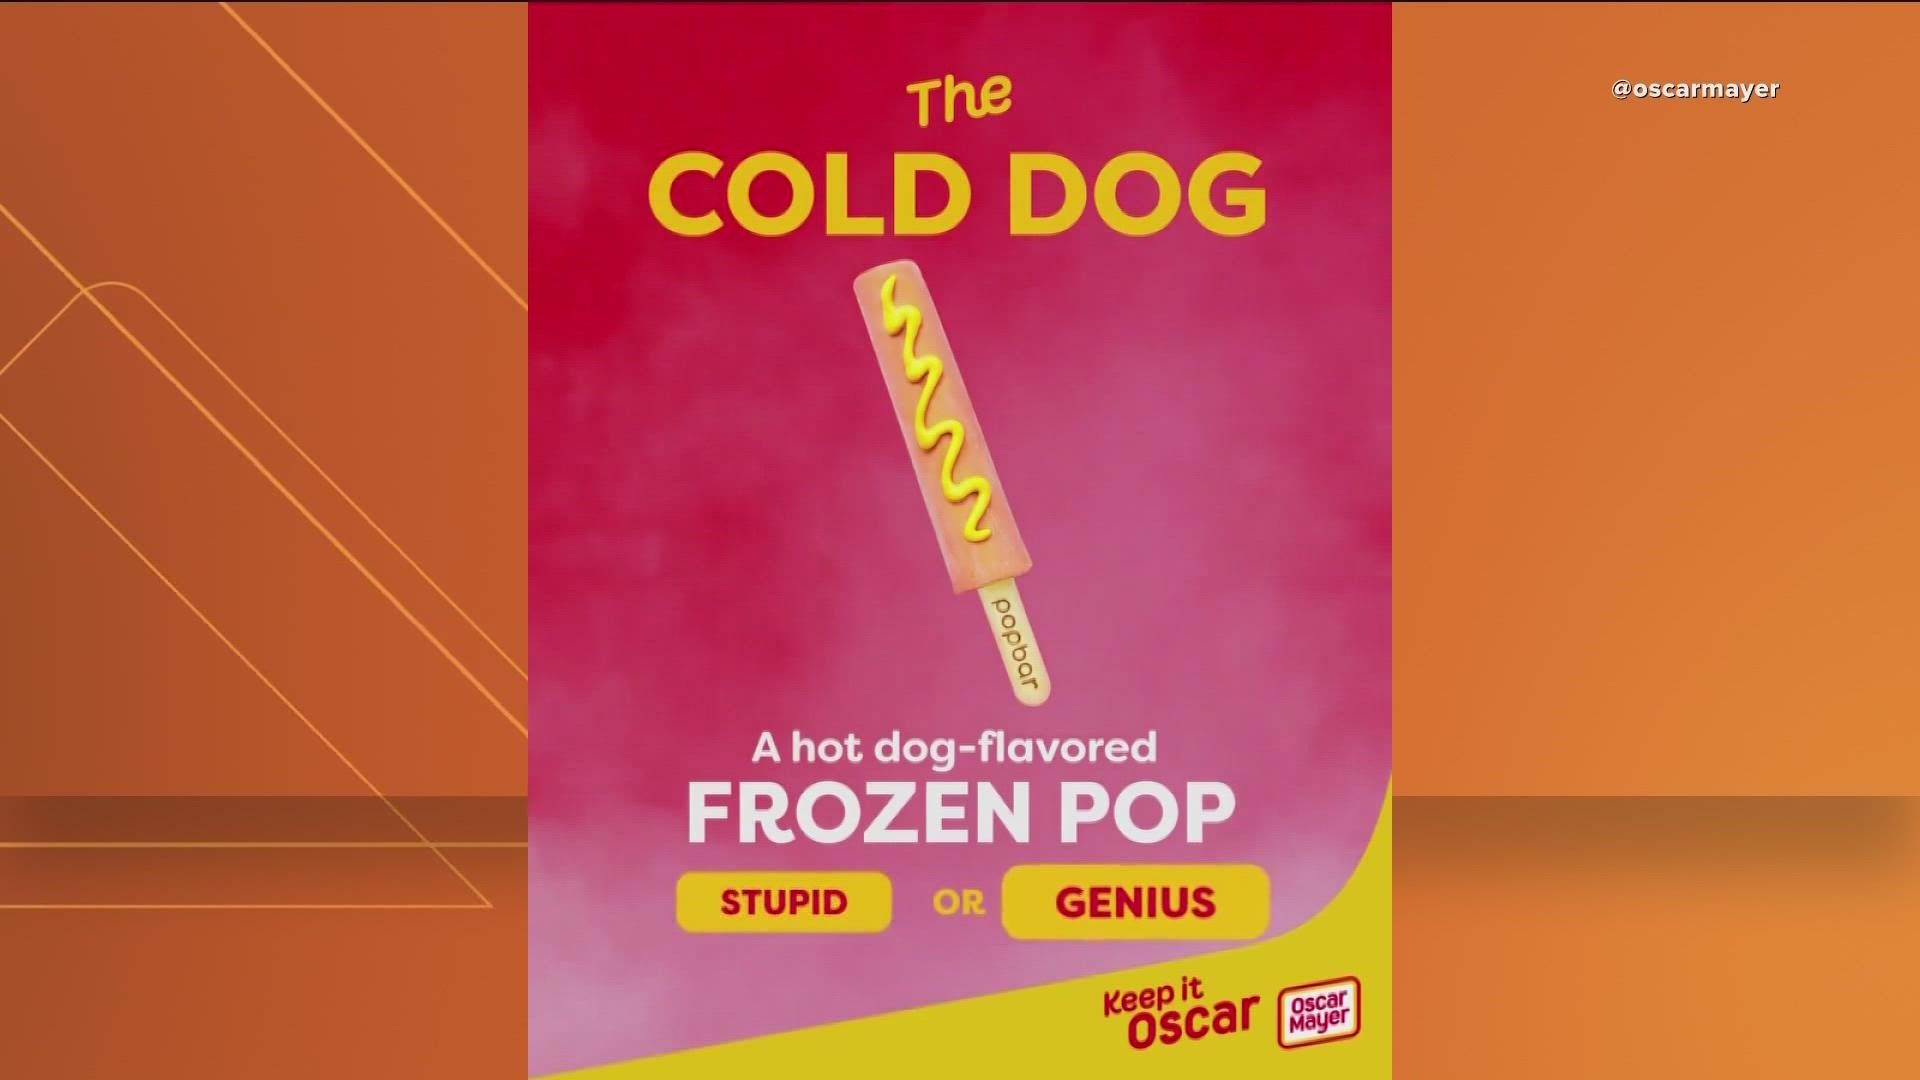 Is WTOL 11 meteorologist Ryan Wichman's favorite way to enjoy a hot dog stupid or genius? Here's how the team feels about that and hot dog-flavored popsicles.